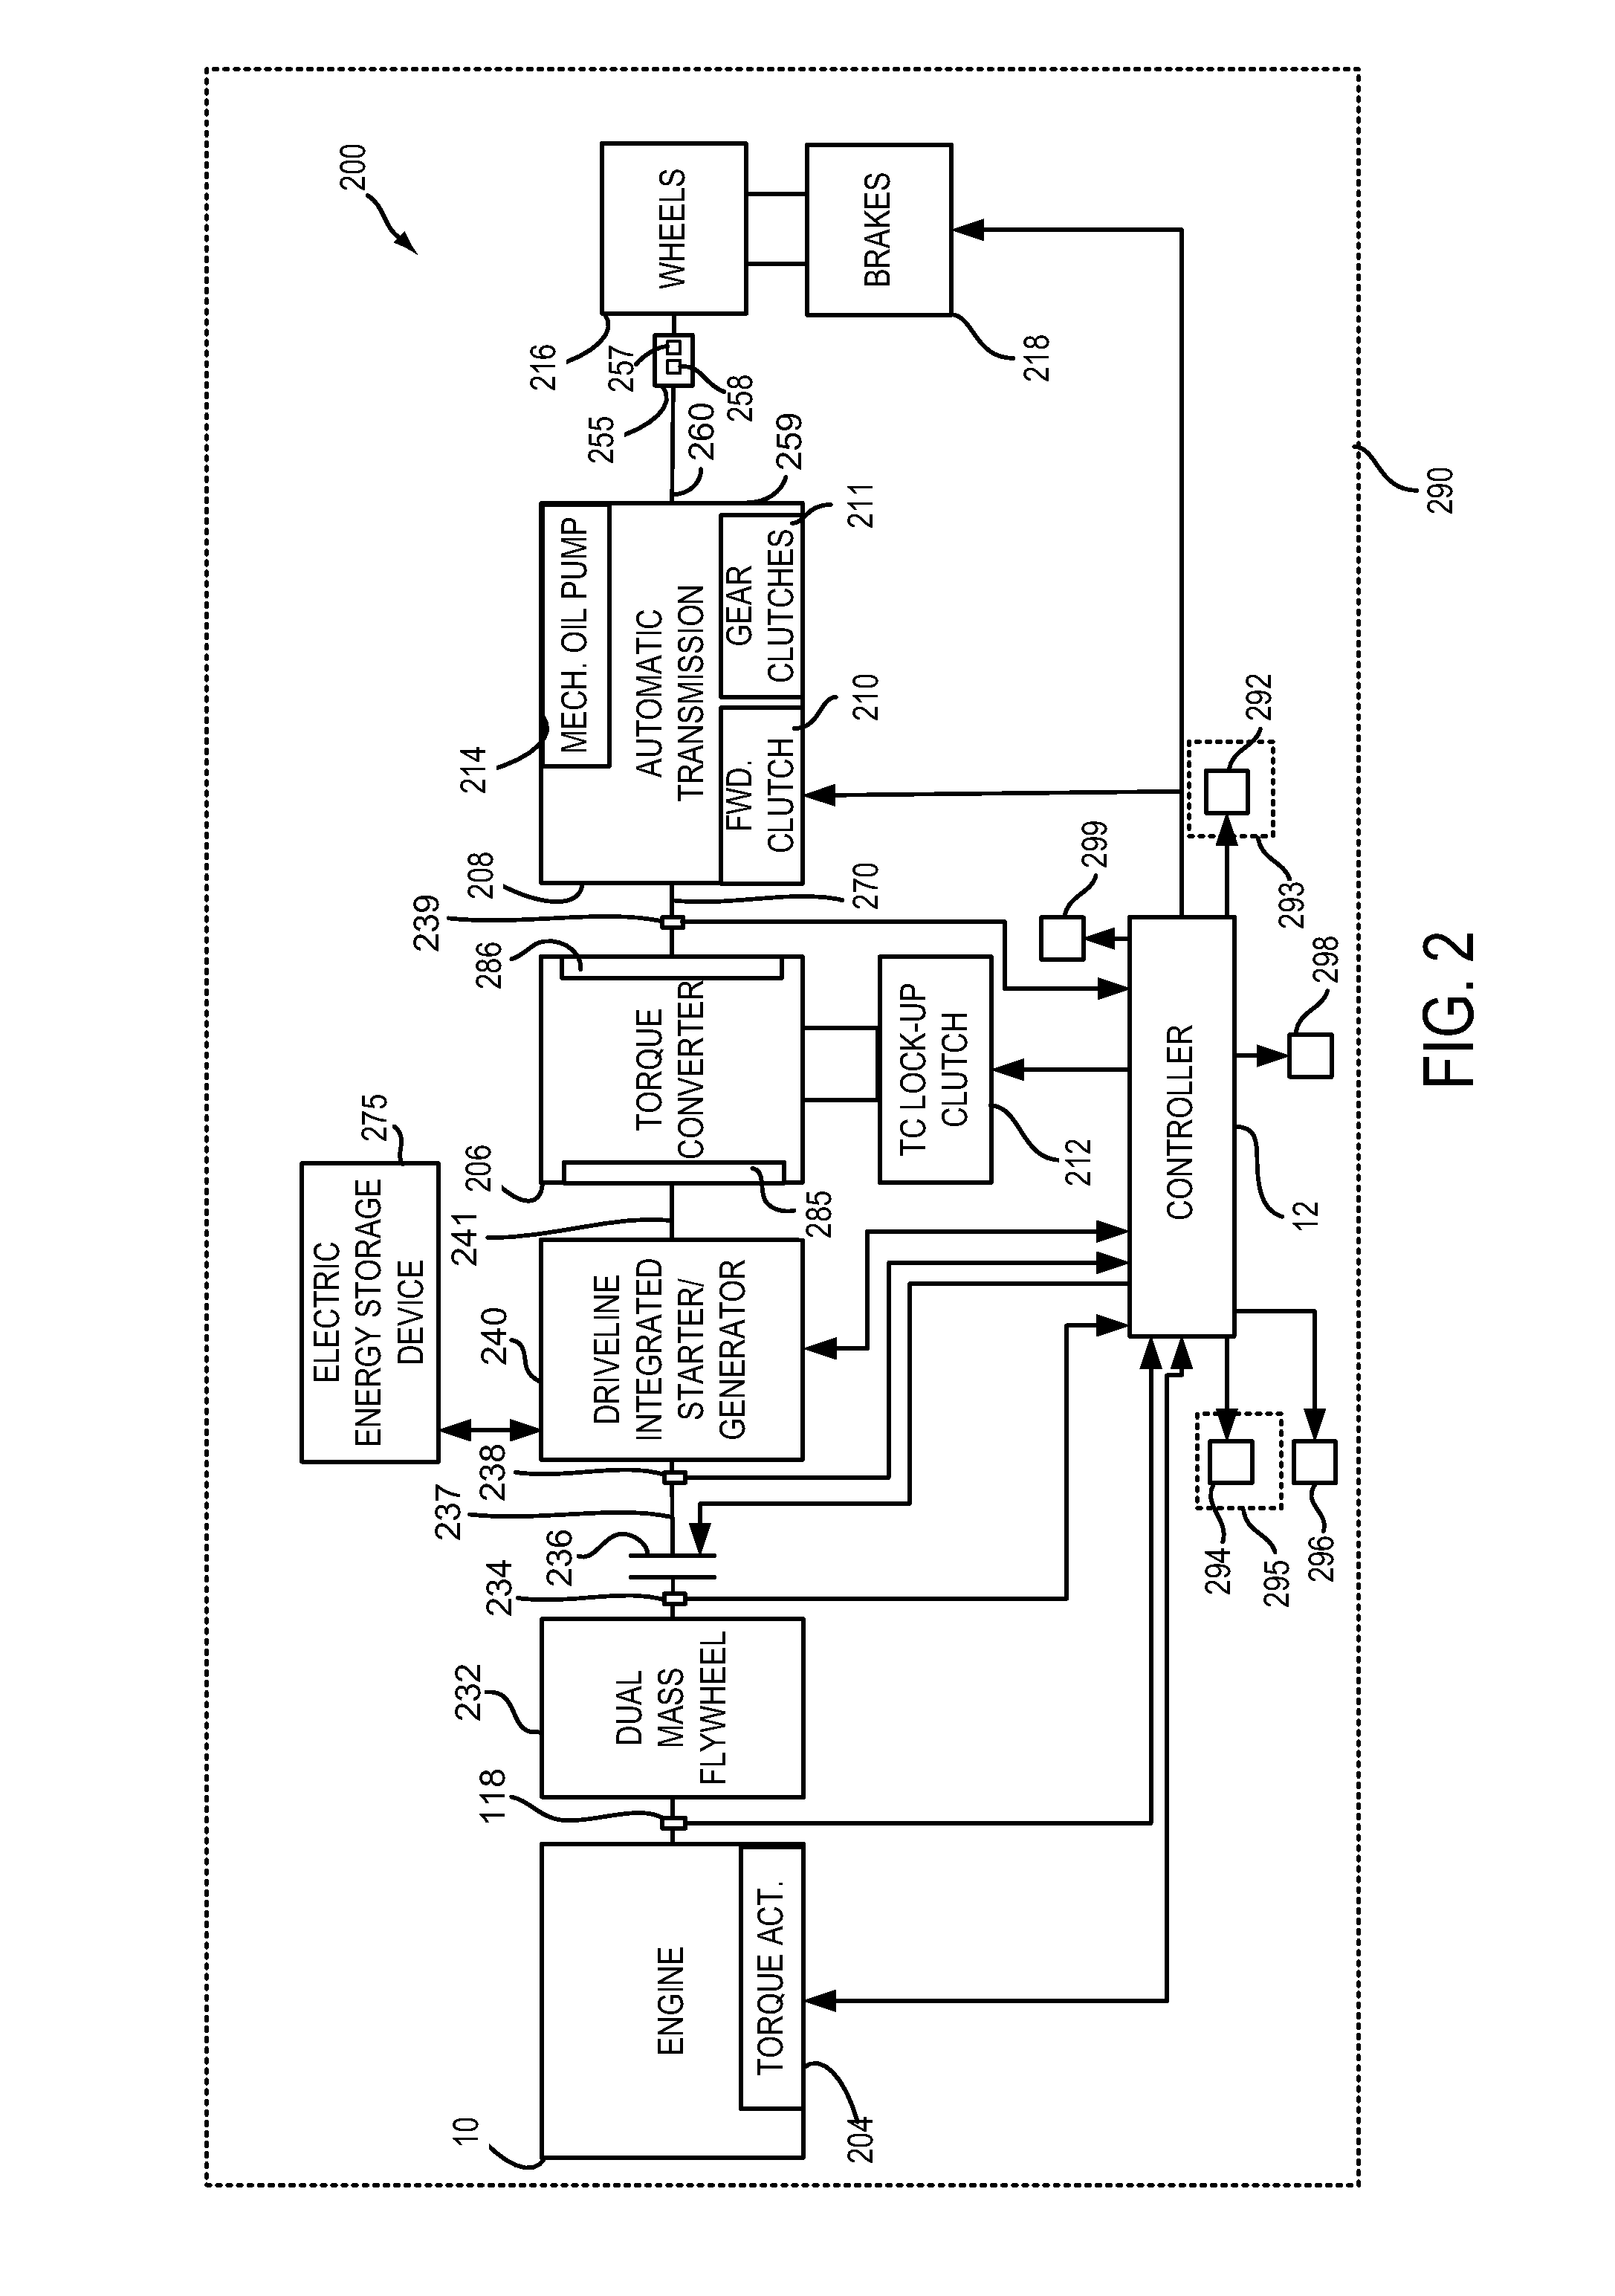 Methods and systems for stopping an engine